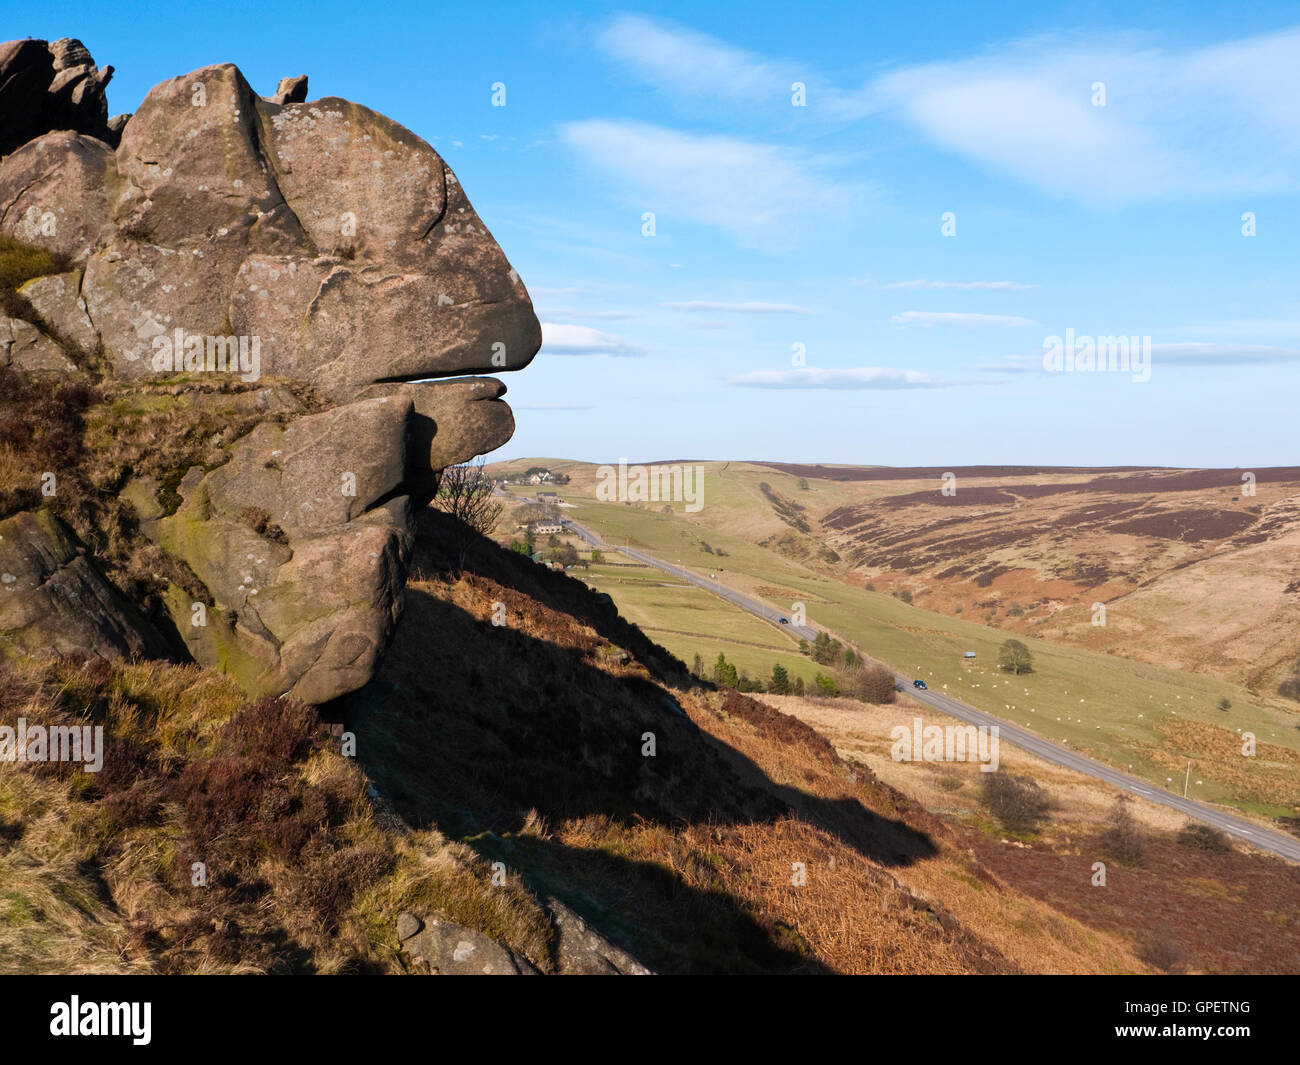 A 'face' in the Ramshaw Rocks, a gritstone ridge overlooking the A53 near Leek in the Peak District National Park, Staffordshire Stock Photo